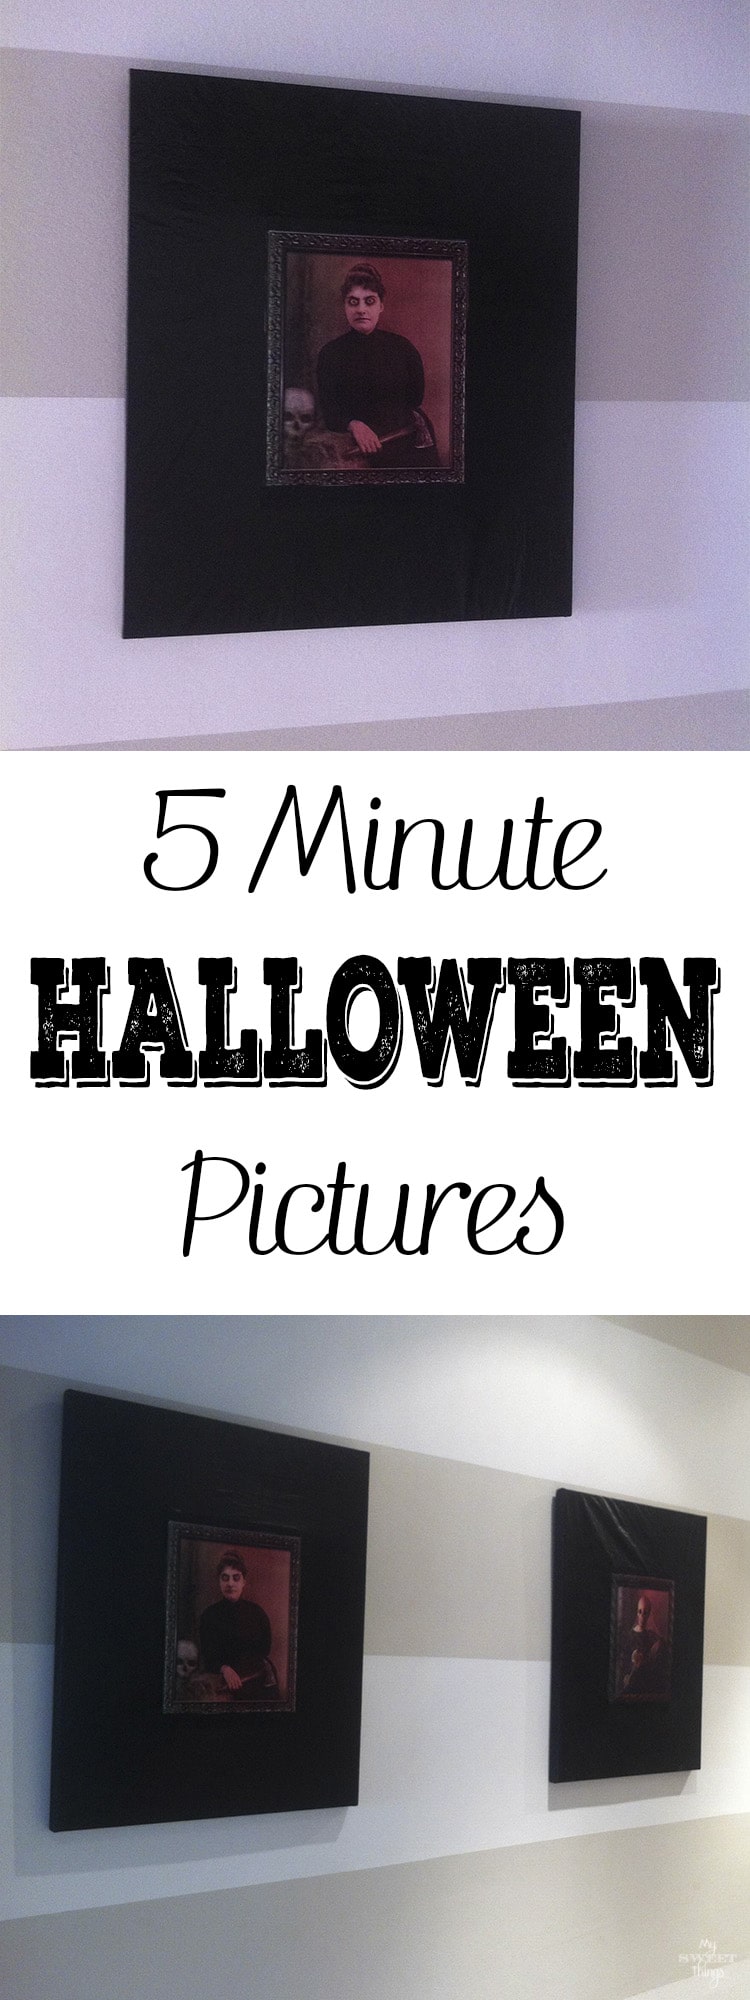 5 Minute Halloween pictures - An easy DIY you can do with your kids as part of your Halloween decor on a budget · Via www.sweethings.net